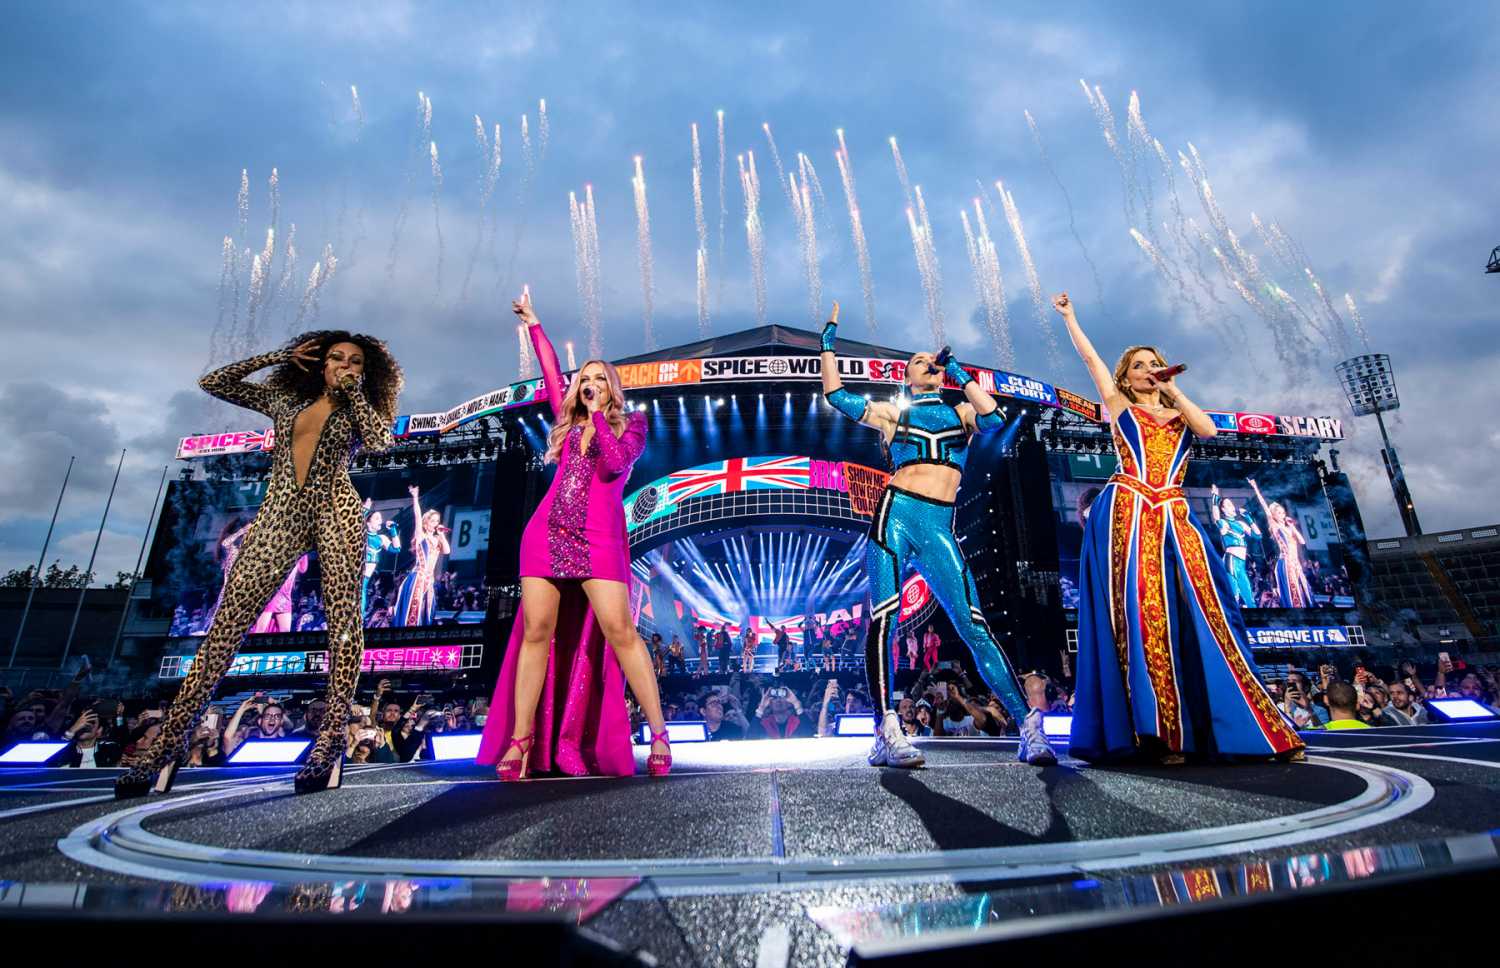 The Spice Girls comeback show at Dublin’s Croke Park welcomed an audience of 75,000 people (Photo by Timmsy)